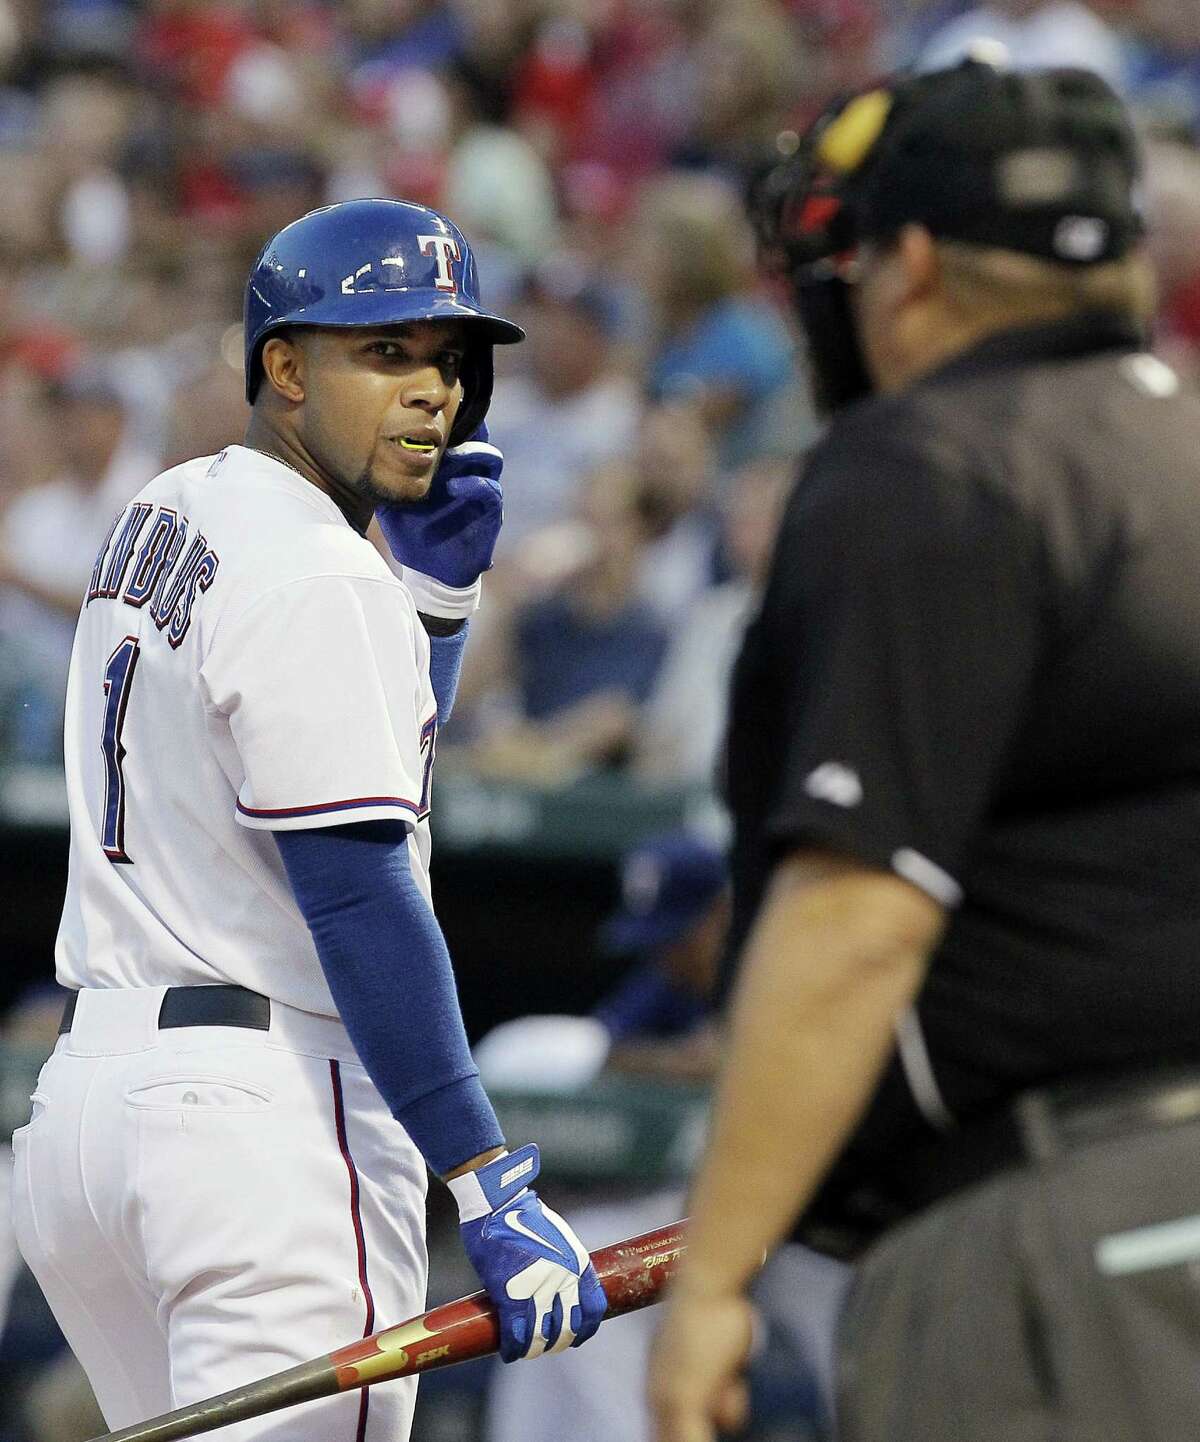 The Rangers' Elvis Andrus glances toward home plate umpire Fieldin Culbreth after striking out in the second inning.